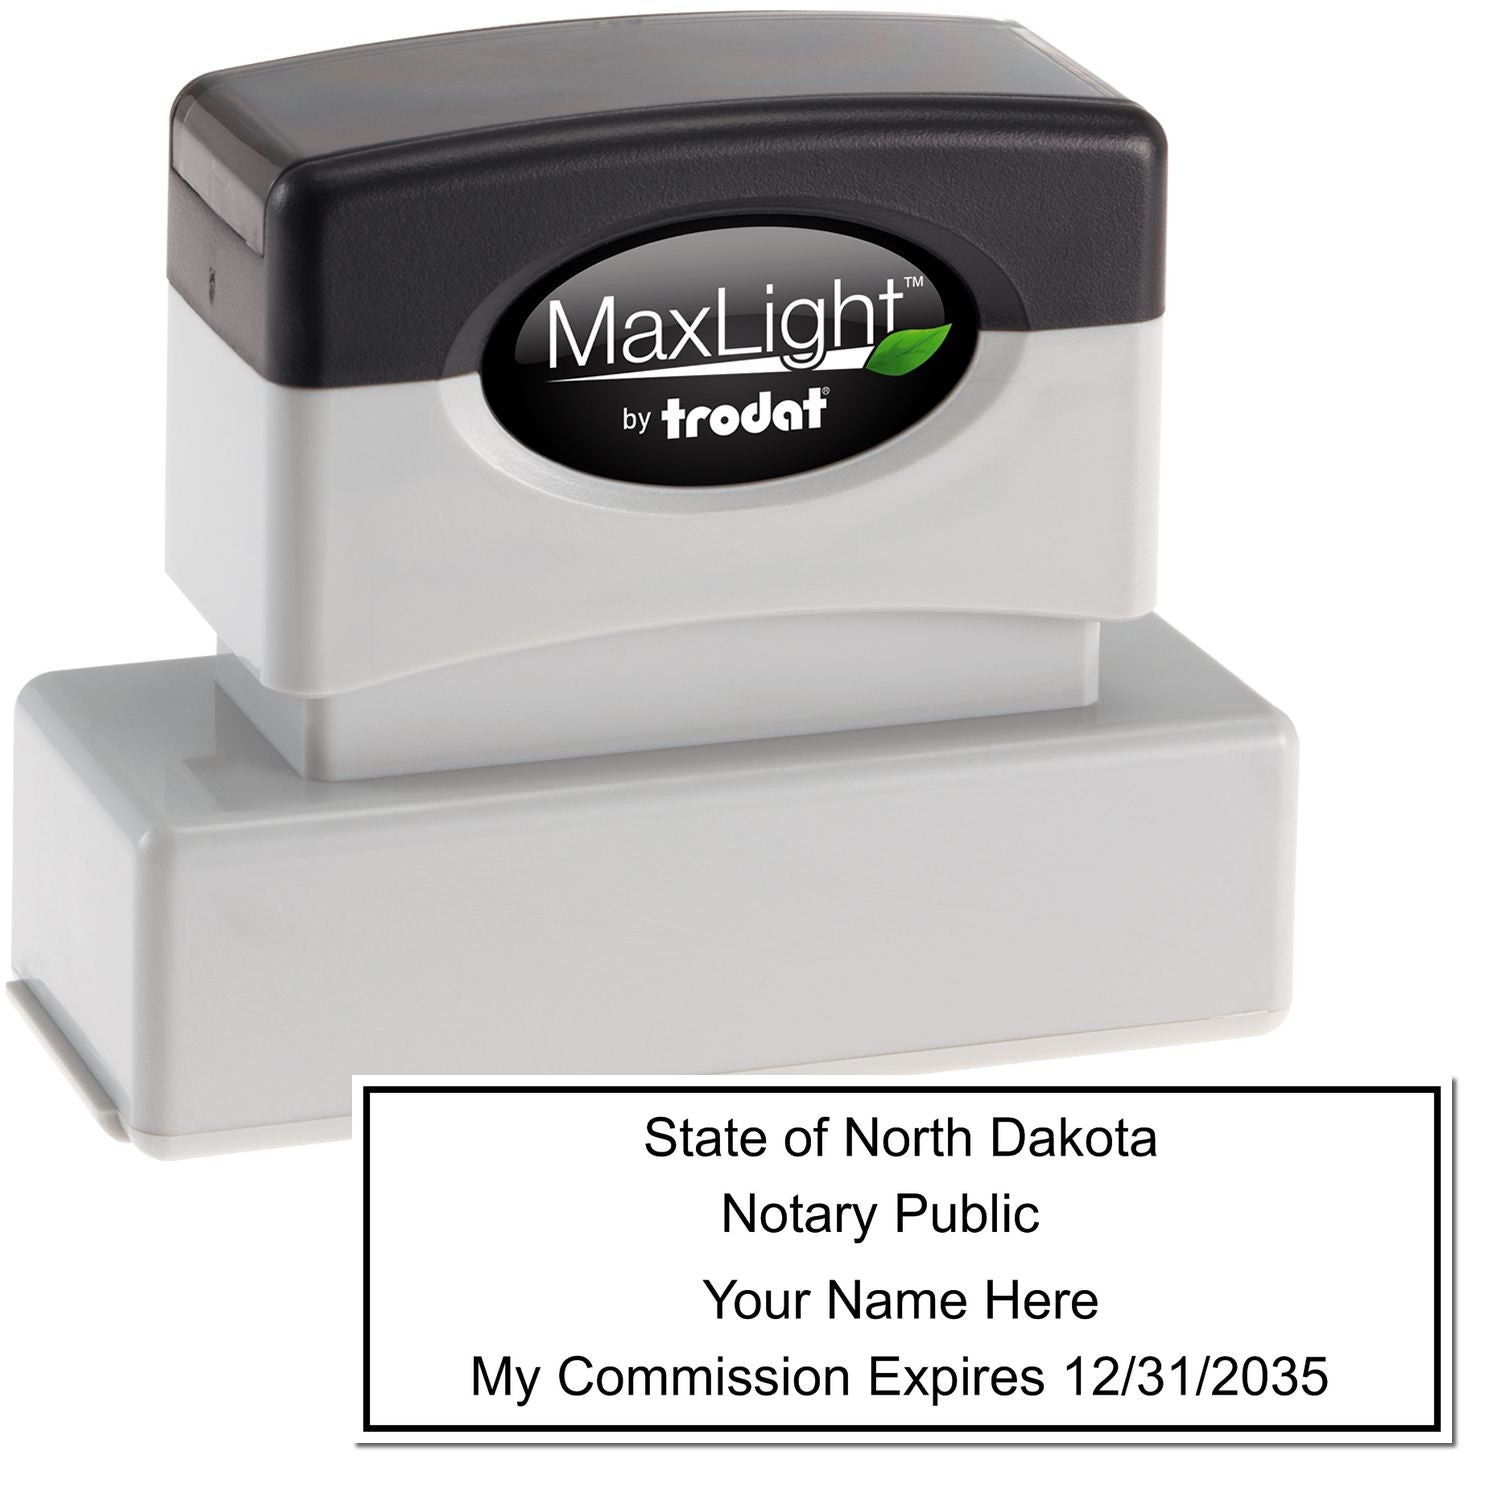 The main image for the MaxLight Premium Pre-Inked North Dakota Rectangular Notarial Stamp depicting a sample of the imprint and electronic files